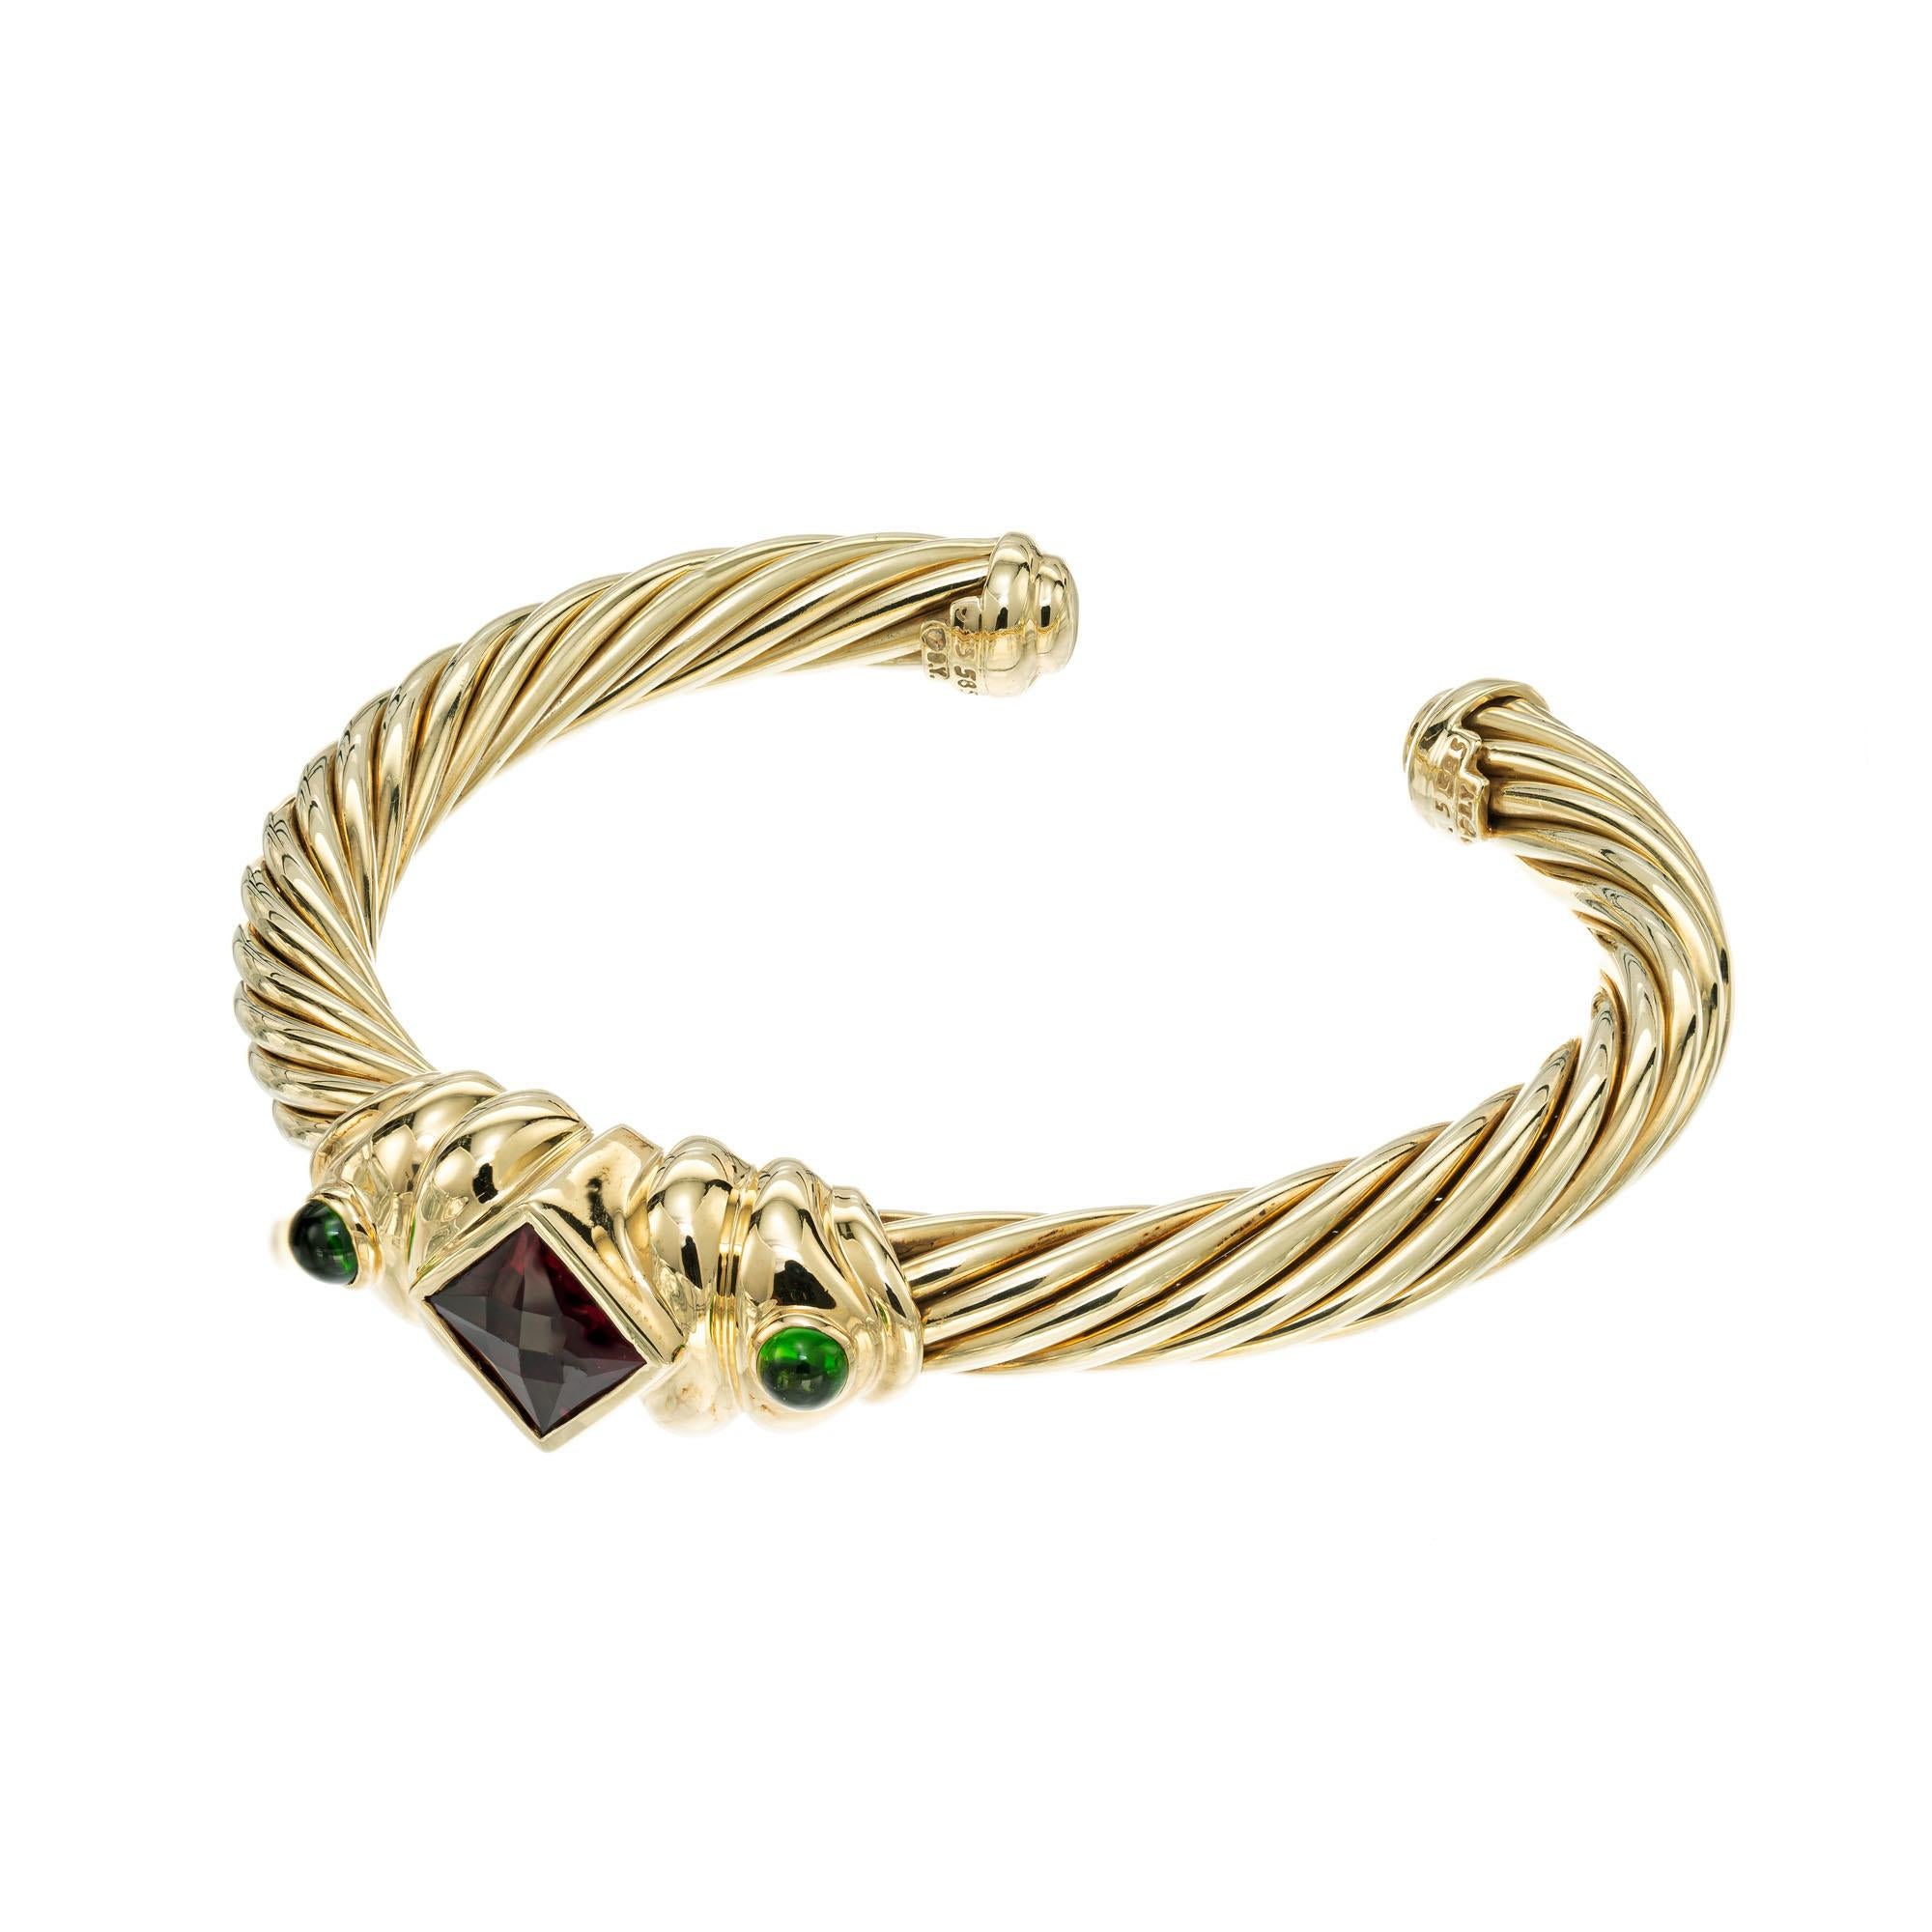 David Yurman Renaissance 14k yellow gold cuff bracelet with a rubellite tourmaline and tow cabochon green accent Tourmalines. fits up to a 7.5 inch wrist. 

1 faceted square brownish red Rubellite Tourmaline, 8x8mm
2 cabochon round green Tourmaline,